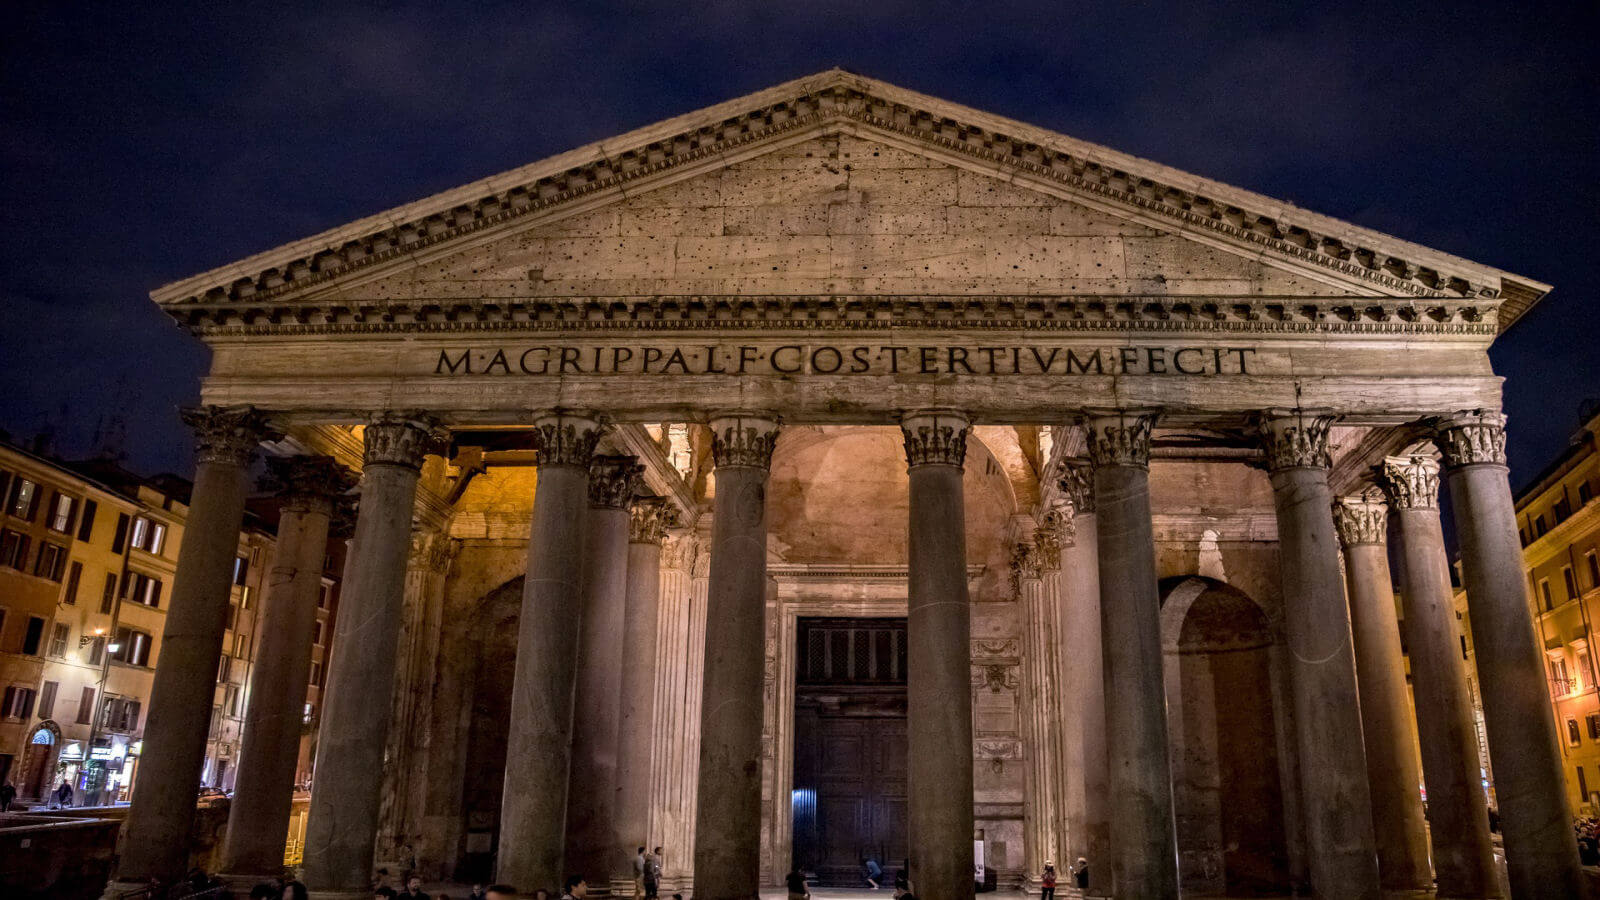 The Pantheon in the city of Rome, Italy